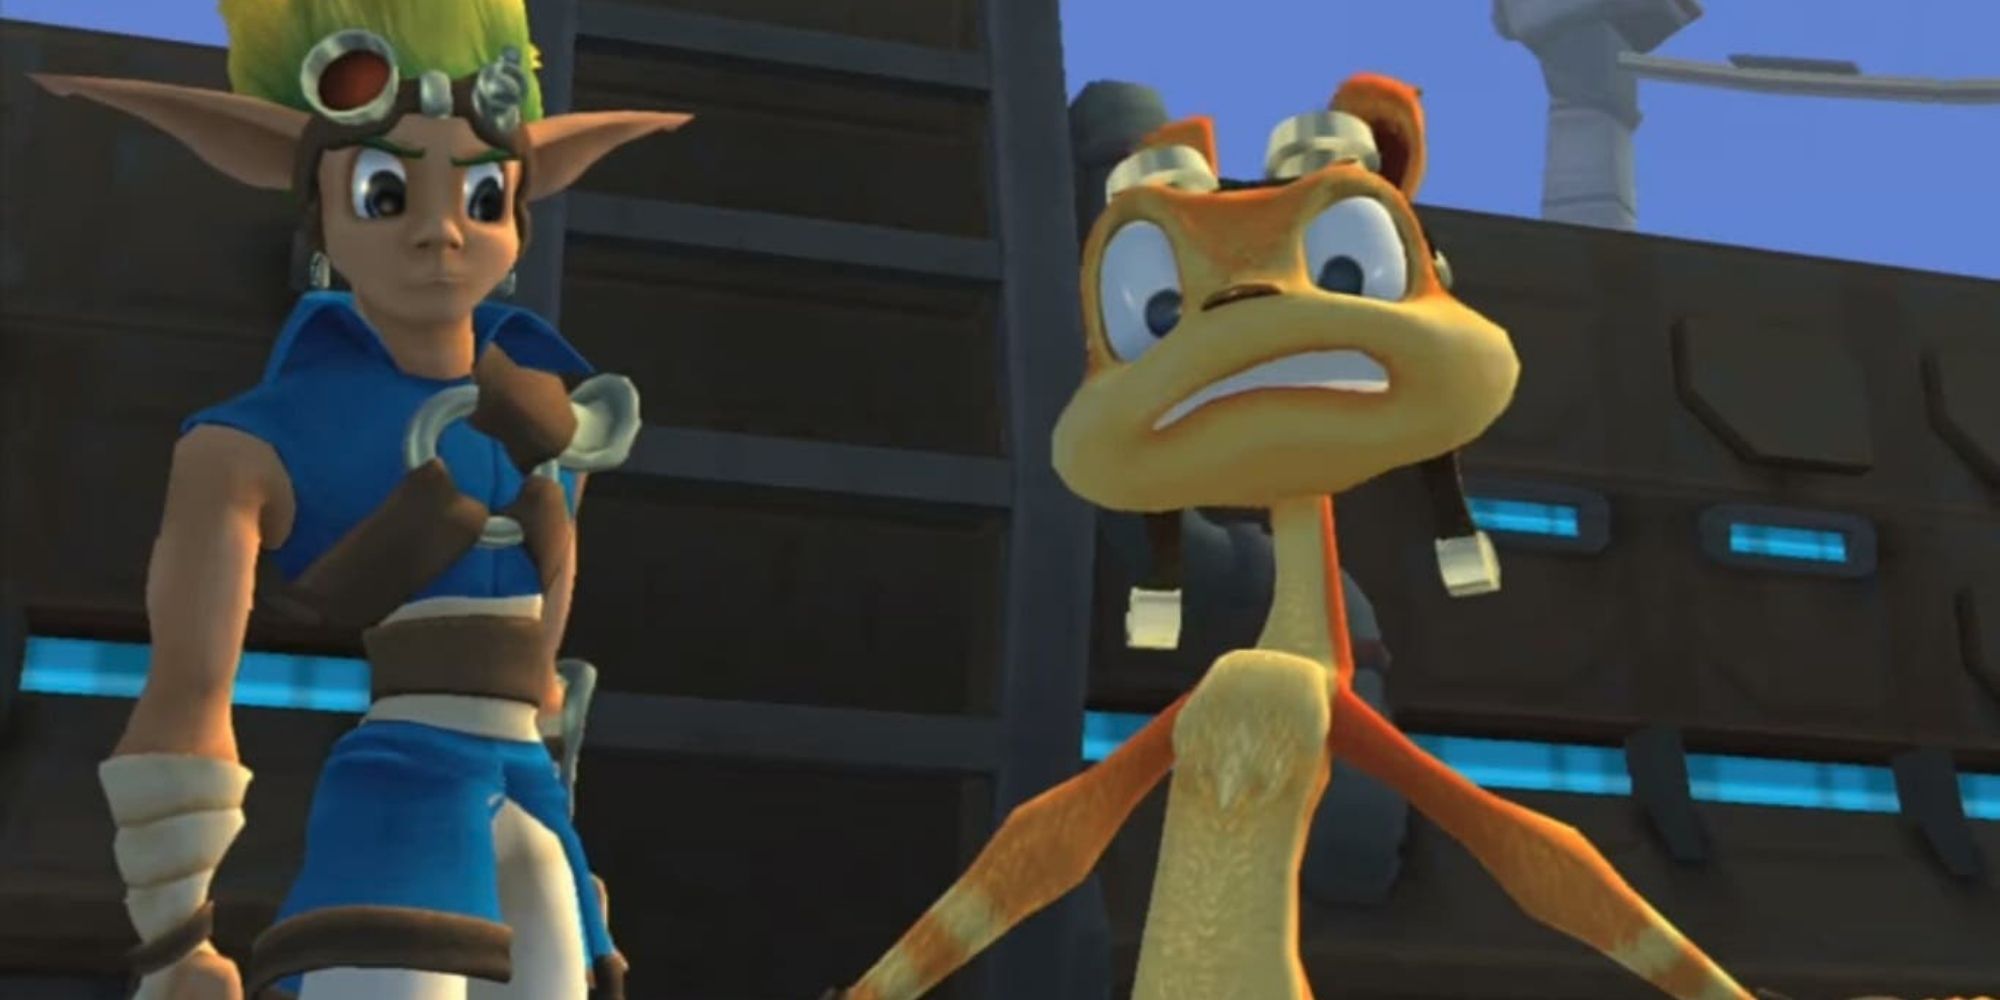 Daxter stares into into the camera with Jak in the background staring back at him